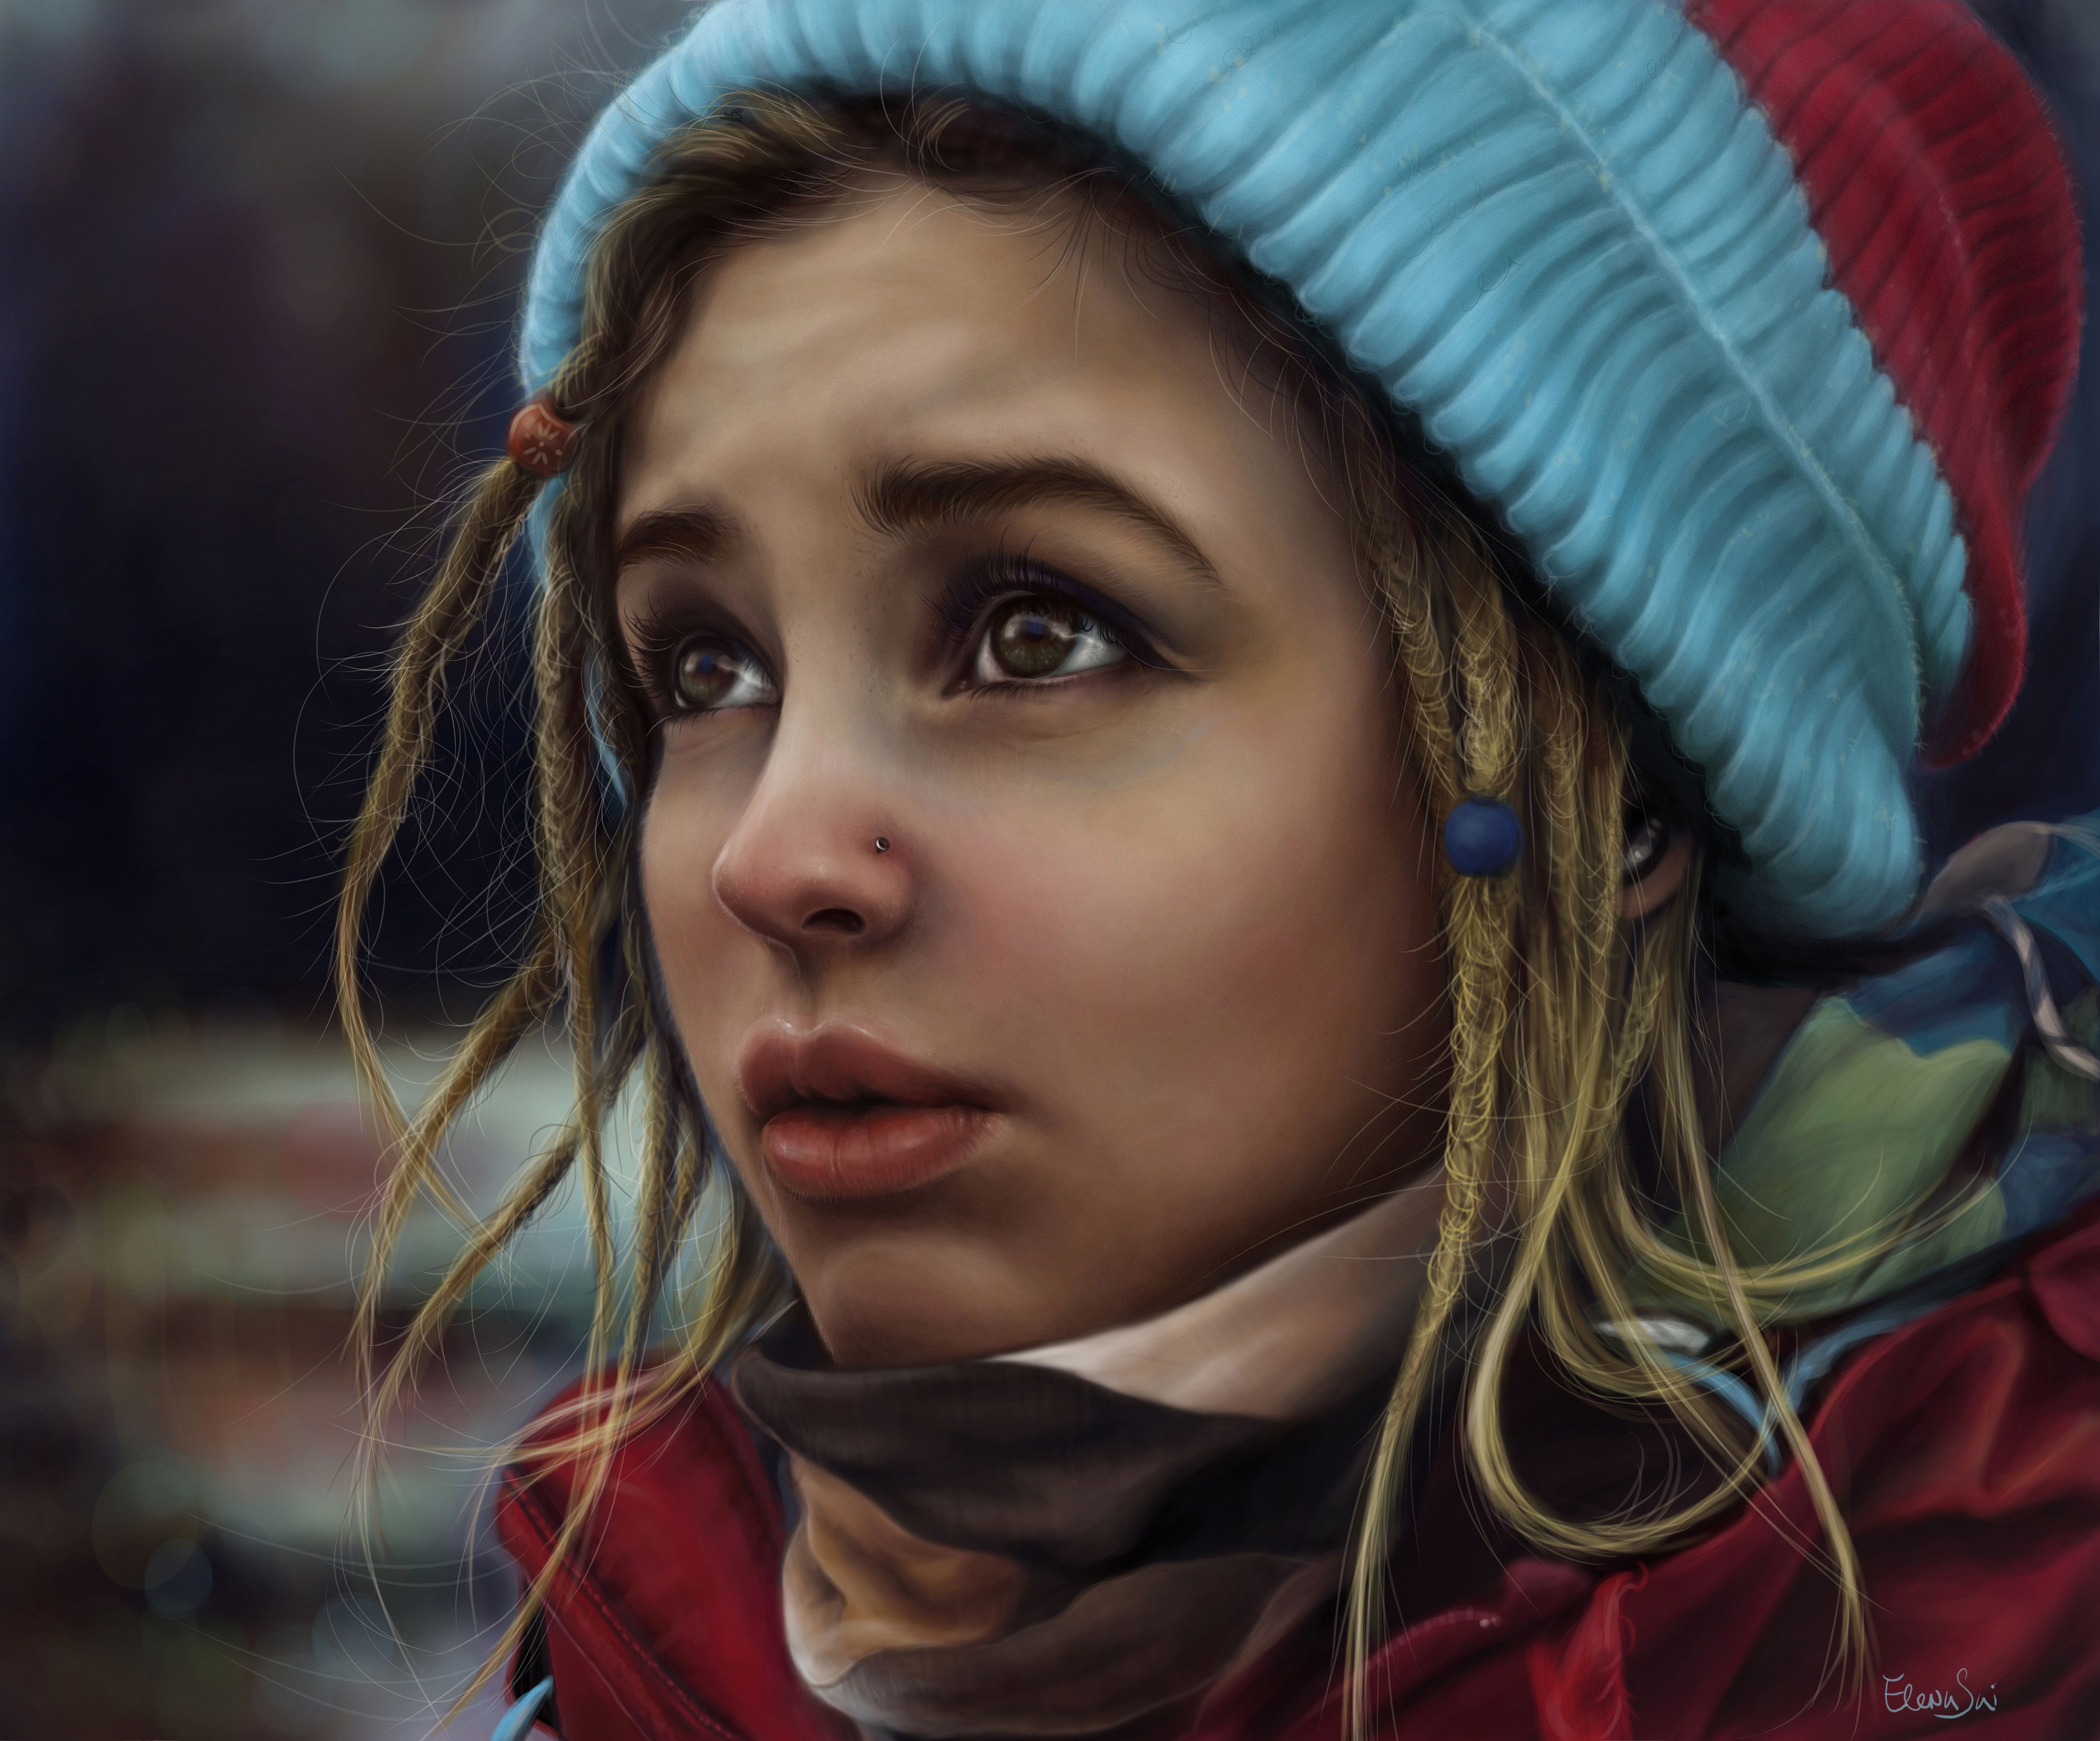 Painting of a Girl by Elena Sai